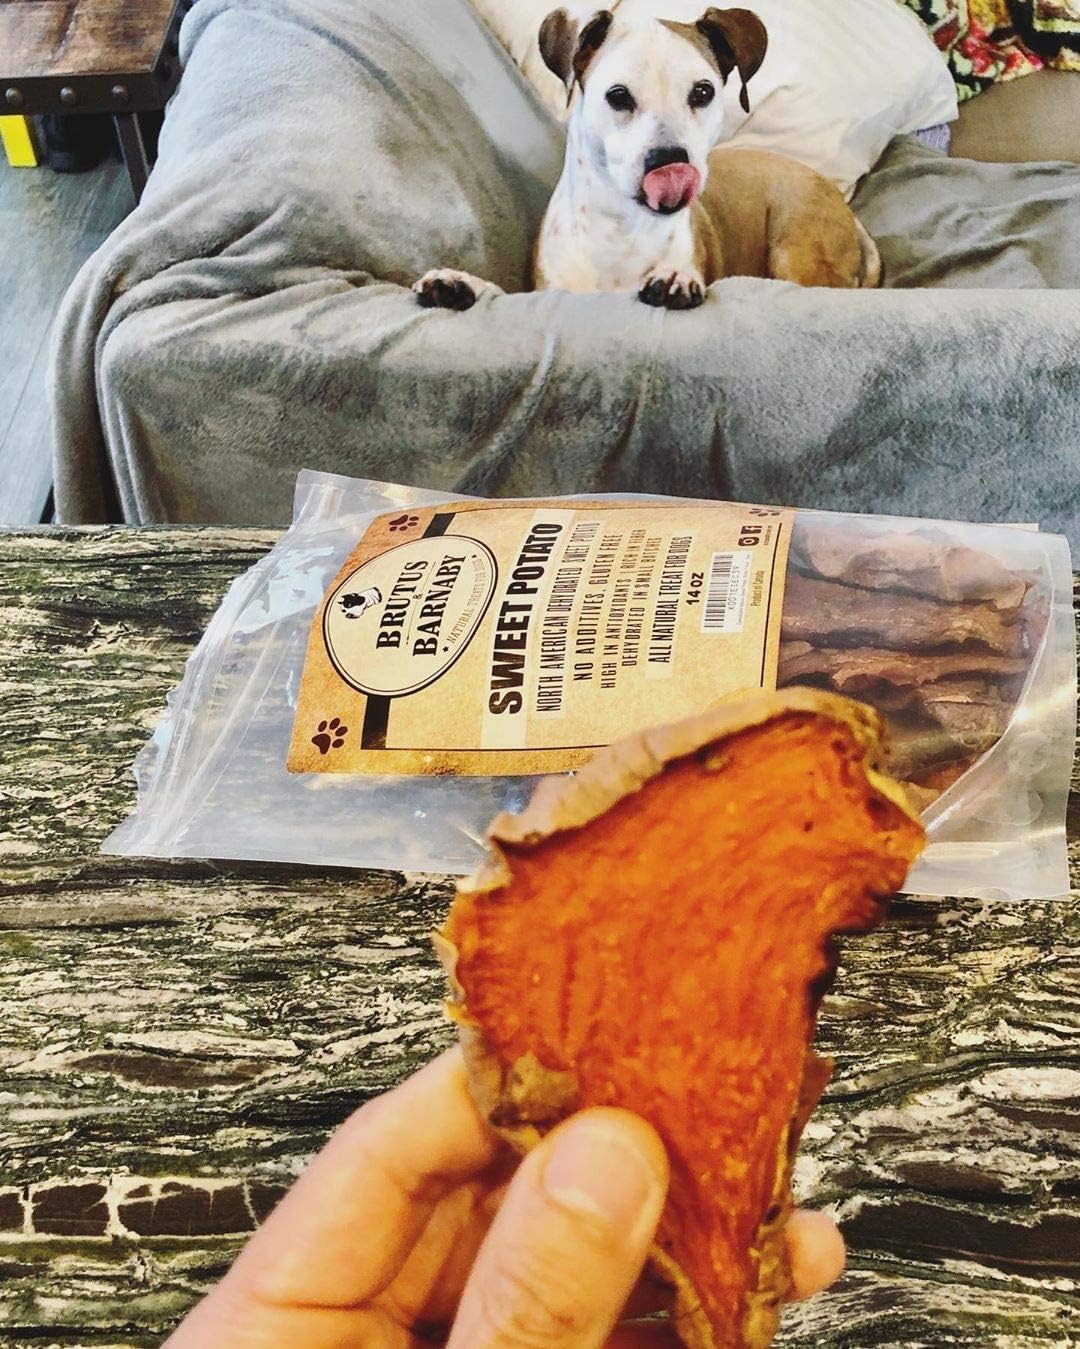 Sweet Potato Slices For Dogs - Half Slices, 5 lbs - Single Ingredient Grain Free Dog Treats, Best High Anti-Oxidant Healthy 100% Natural Thick Cut Dried Sweet Potato Dog Treats, No Added Preservatives : Pet Supplies